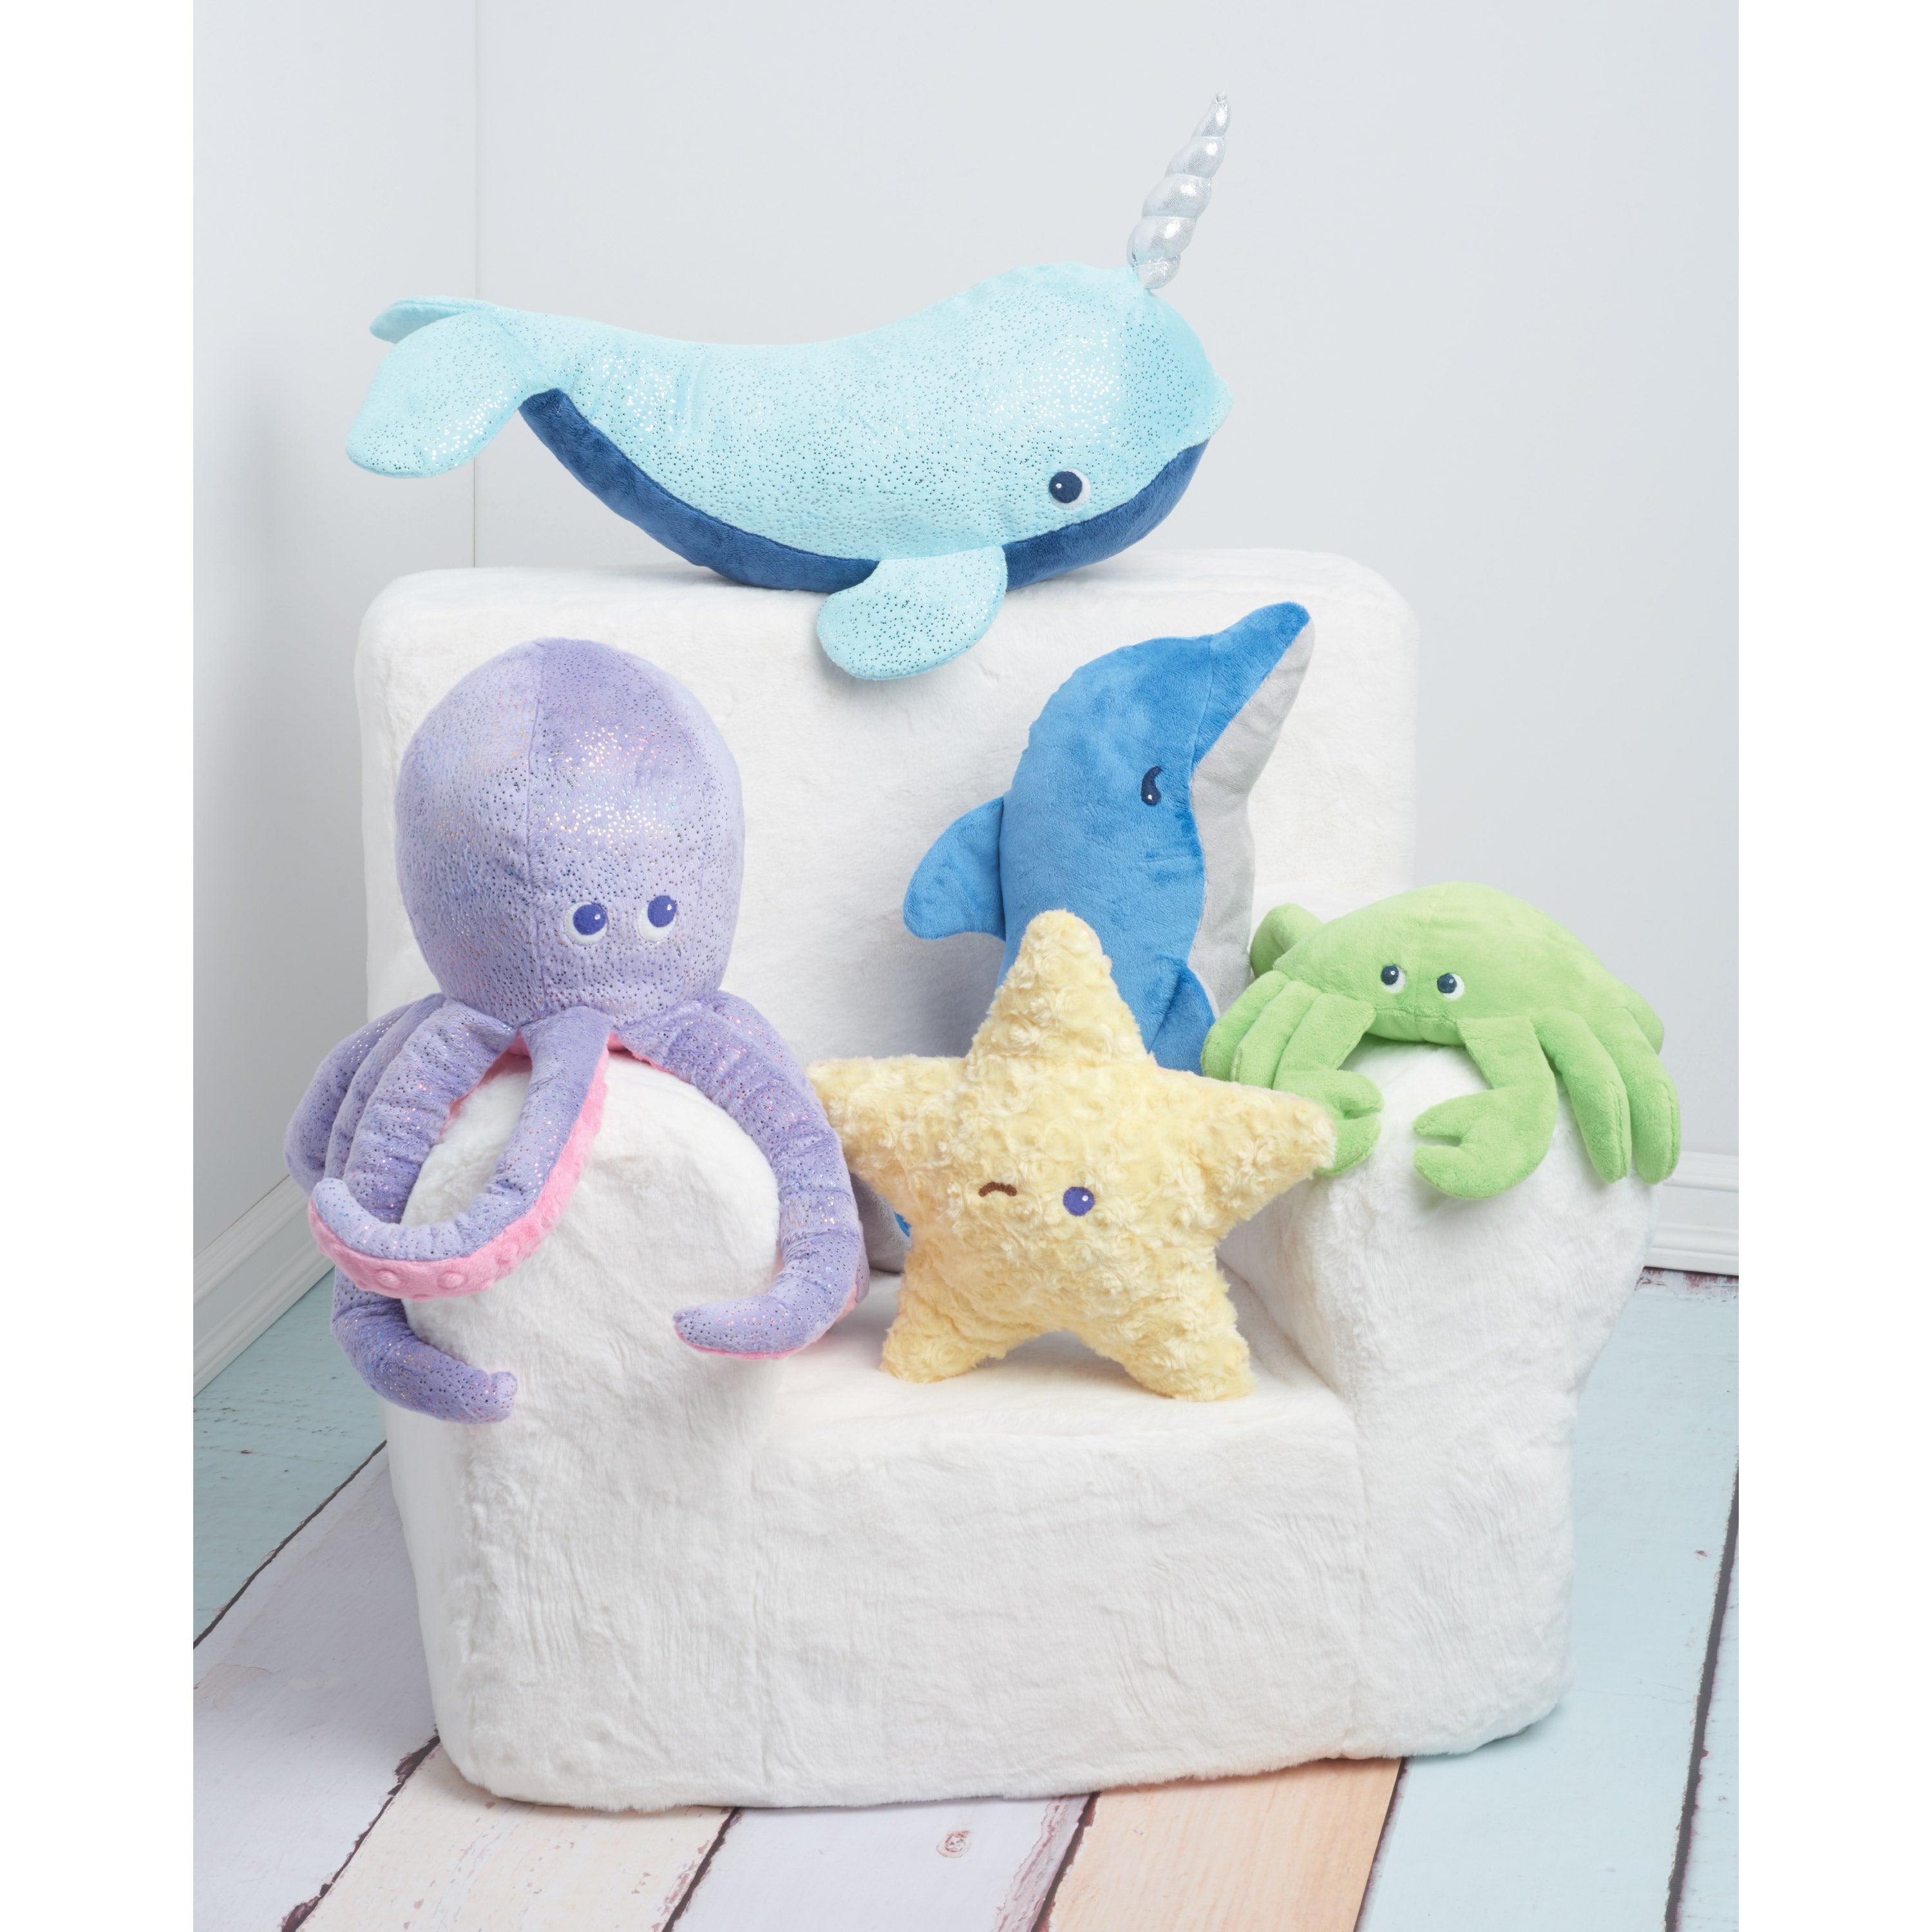 Simplicity 9570 Plush Sea Creatures pattern from Jaycotts Sewing Supplies